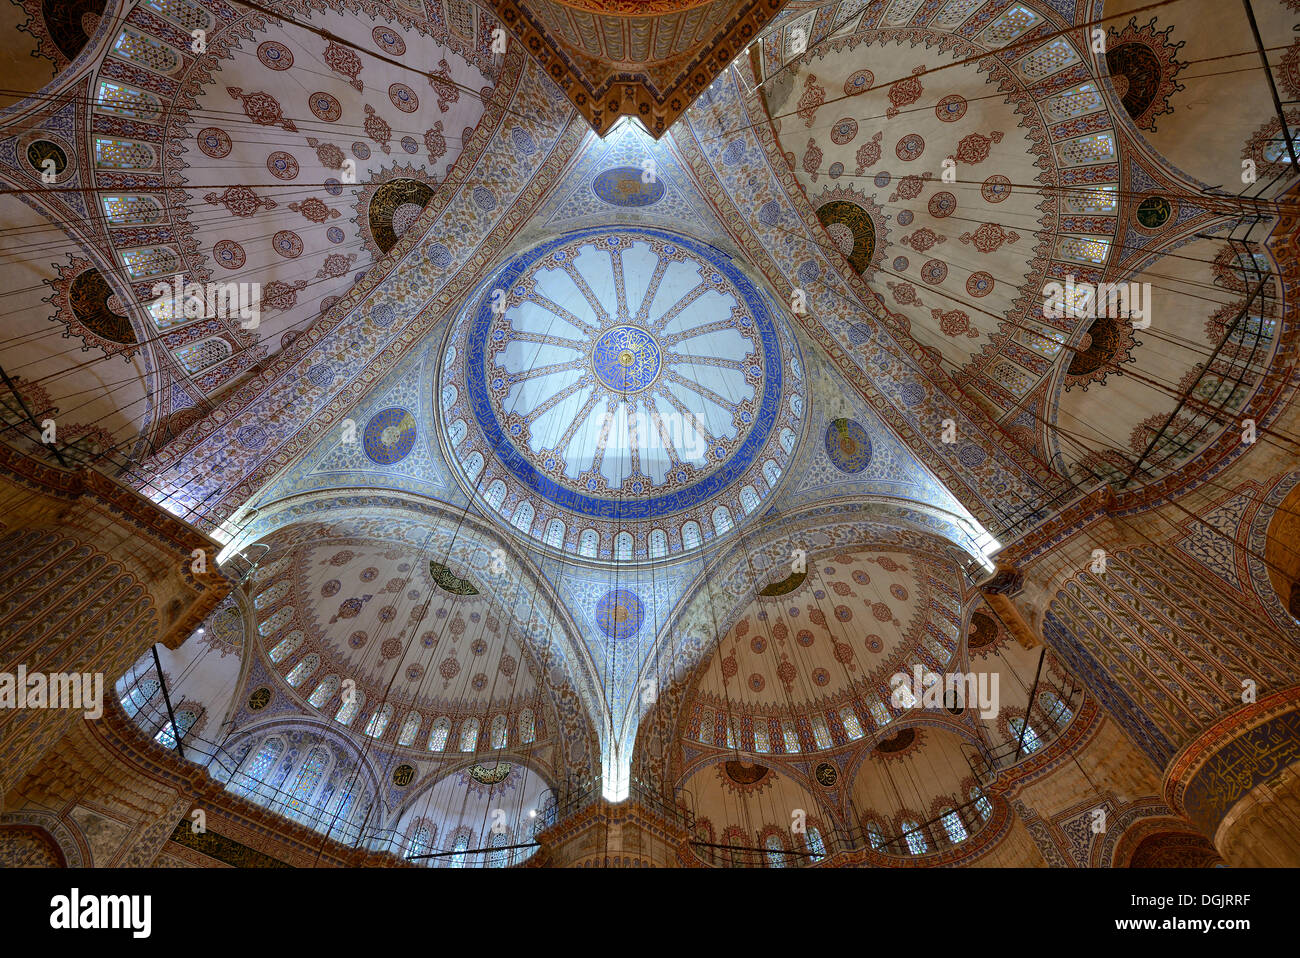 Main dome, Blue Mosque or Sultan Ahmed Mosque, Sultanahmet Camii, UNESCO World Cultural Heritage Site, Istanbul, European side Stock Photo